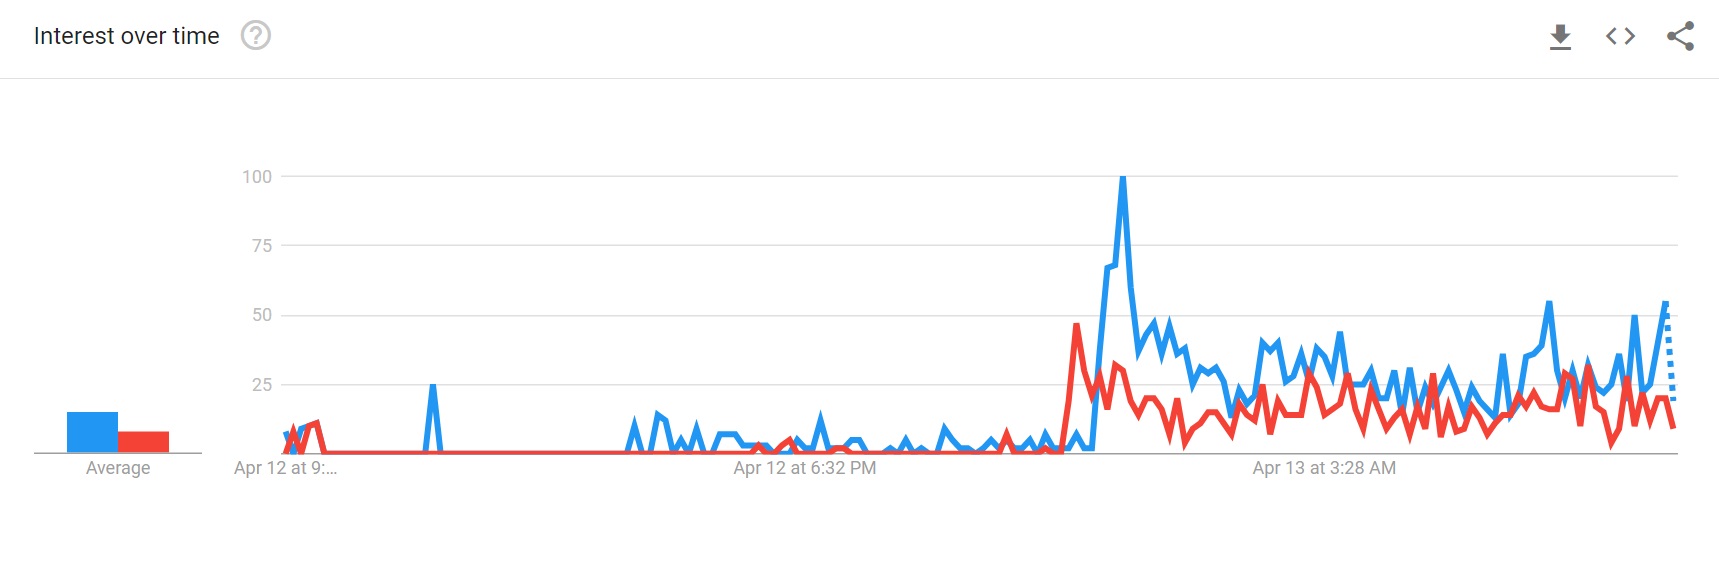 People searched for 'Prince Harry statement' (blue) far more than 'Prince William statement' (red).